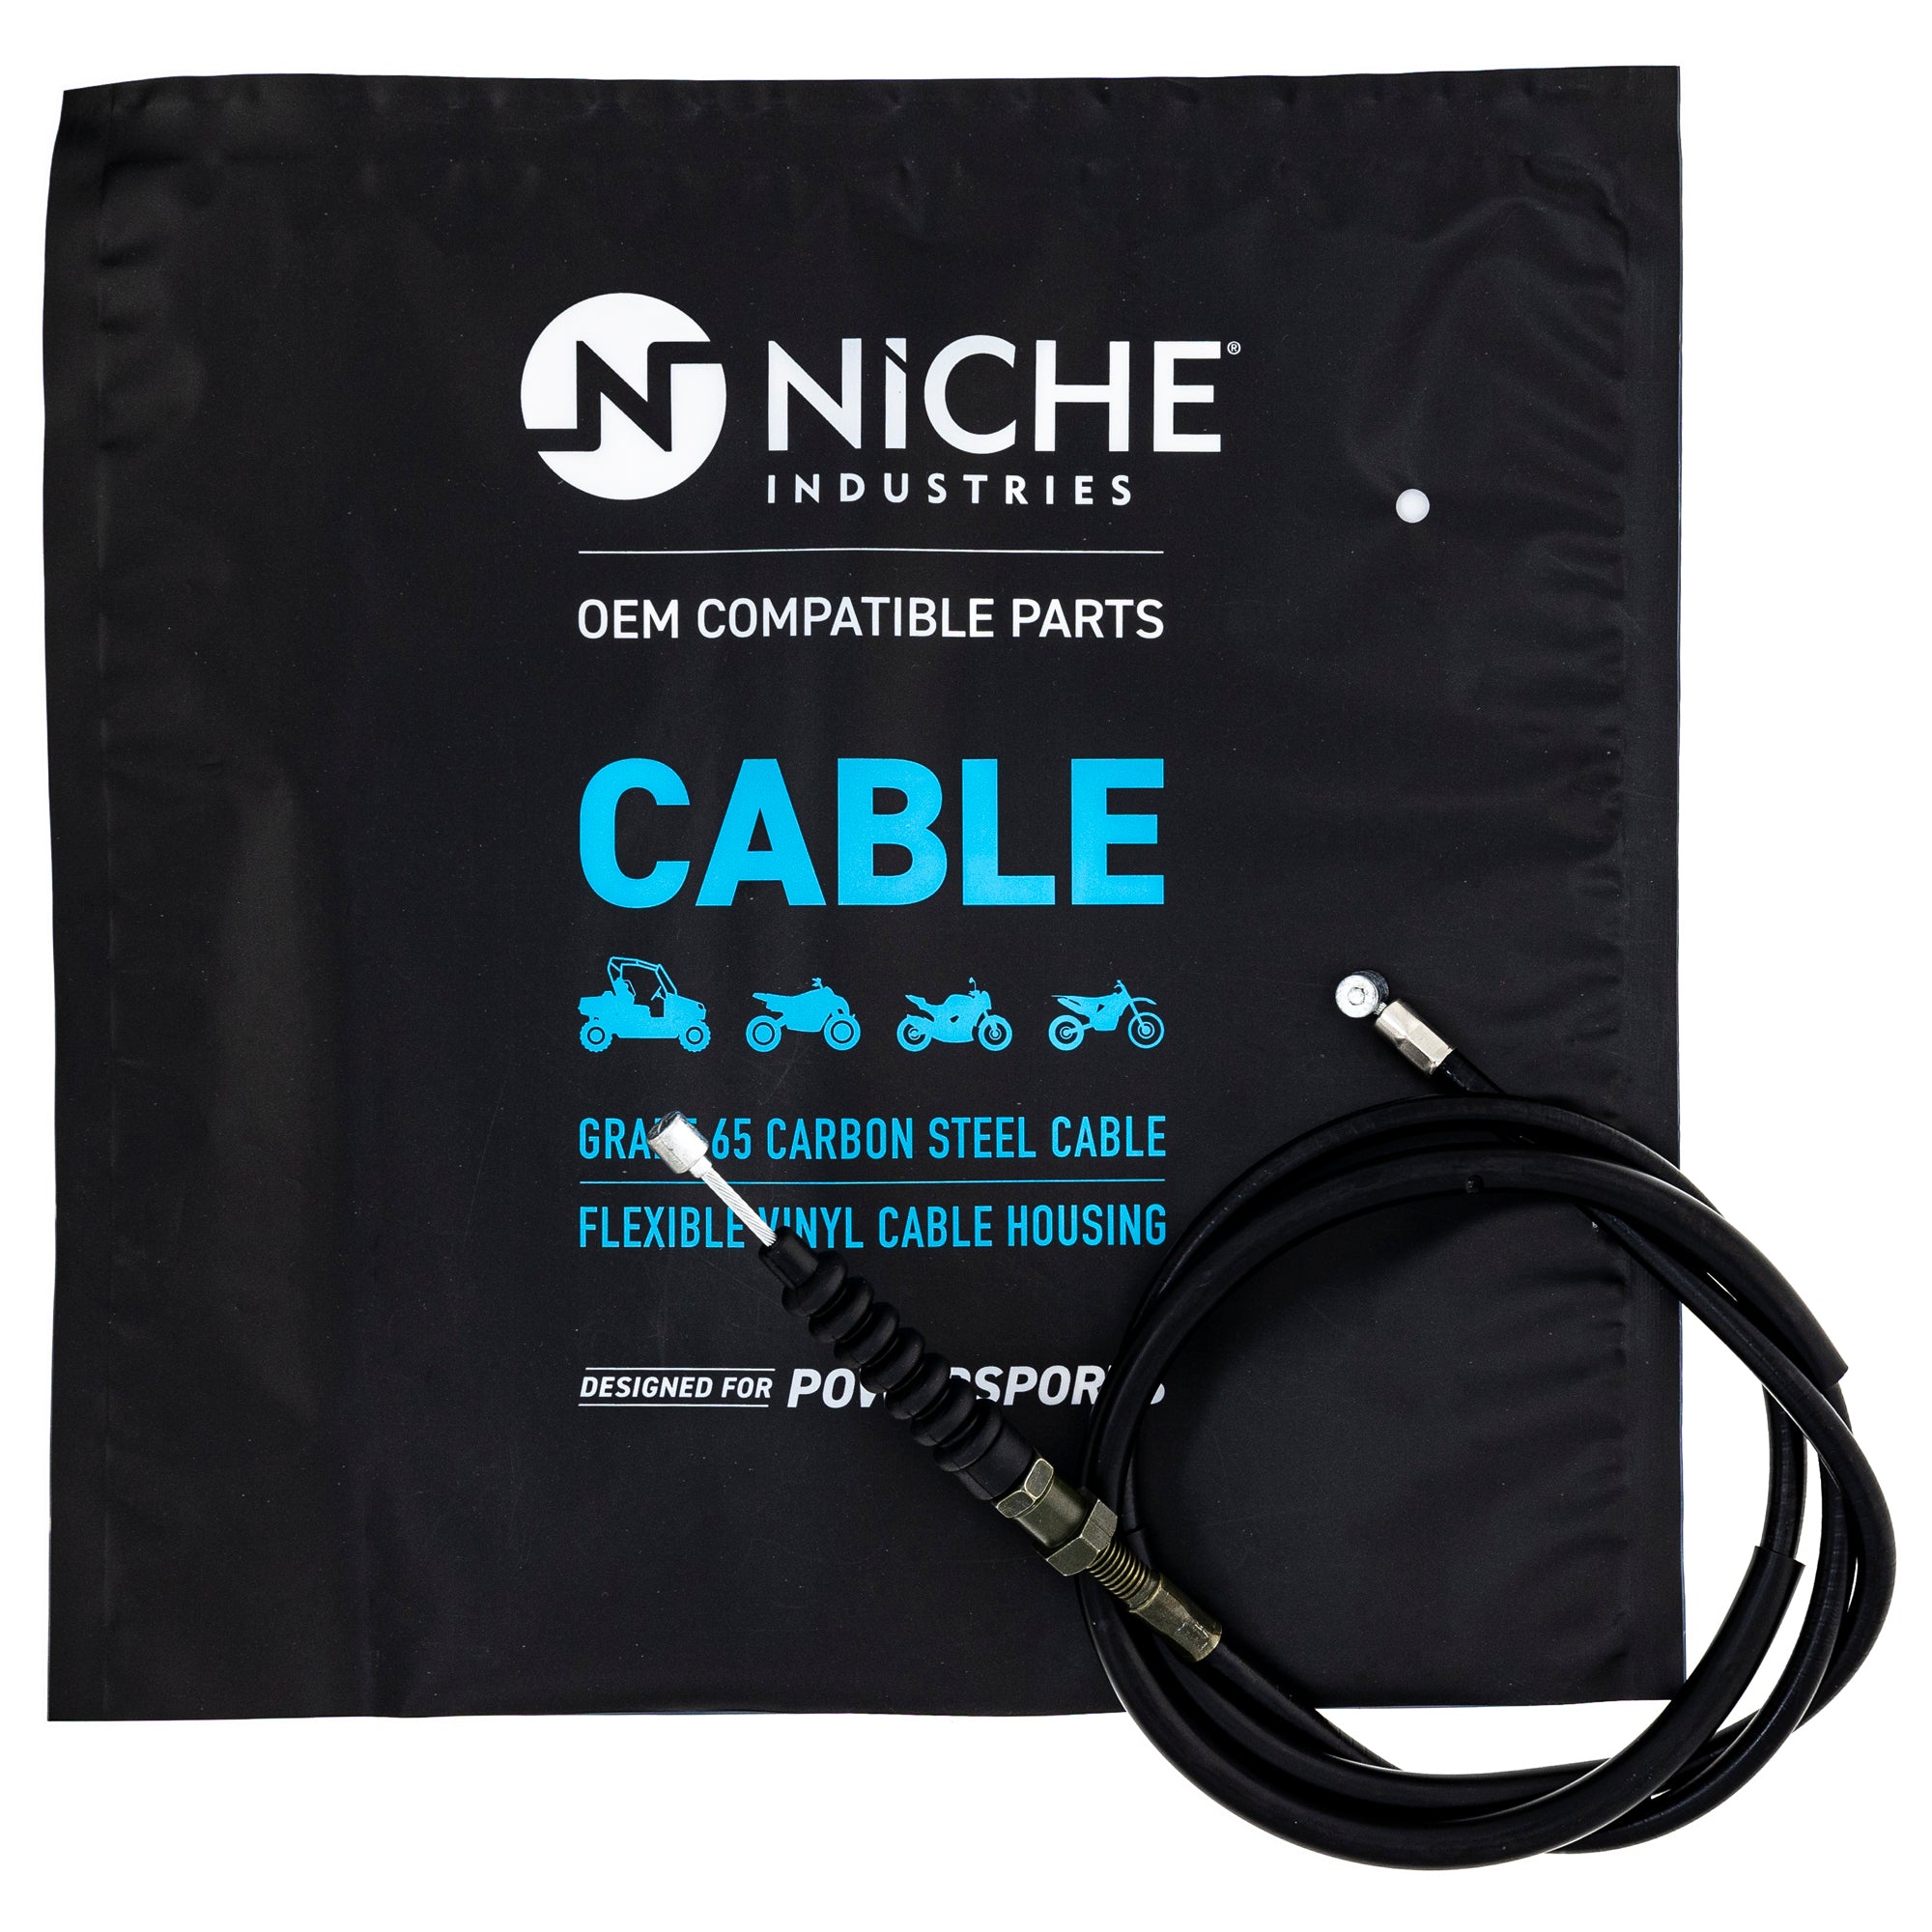 NICHE 519-CCB2832L Front Brake Cable for zOTHER XL350 XL250 Super